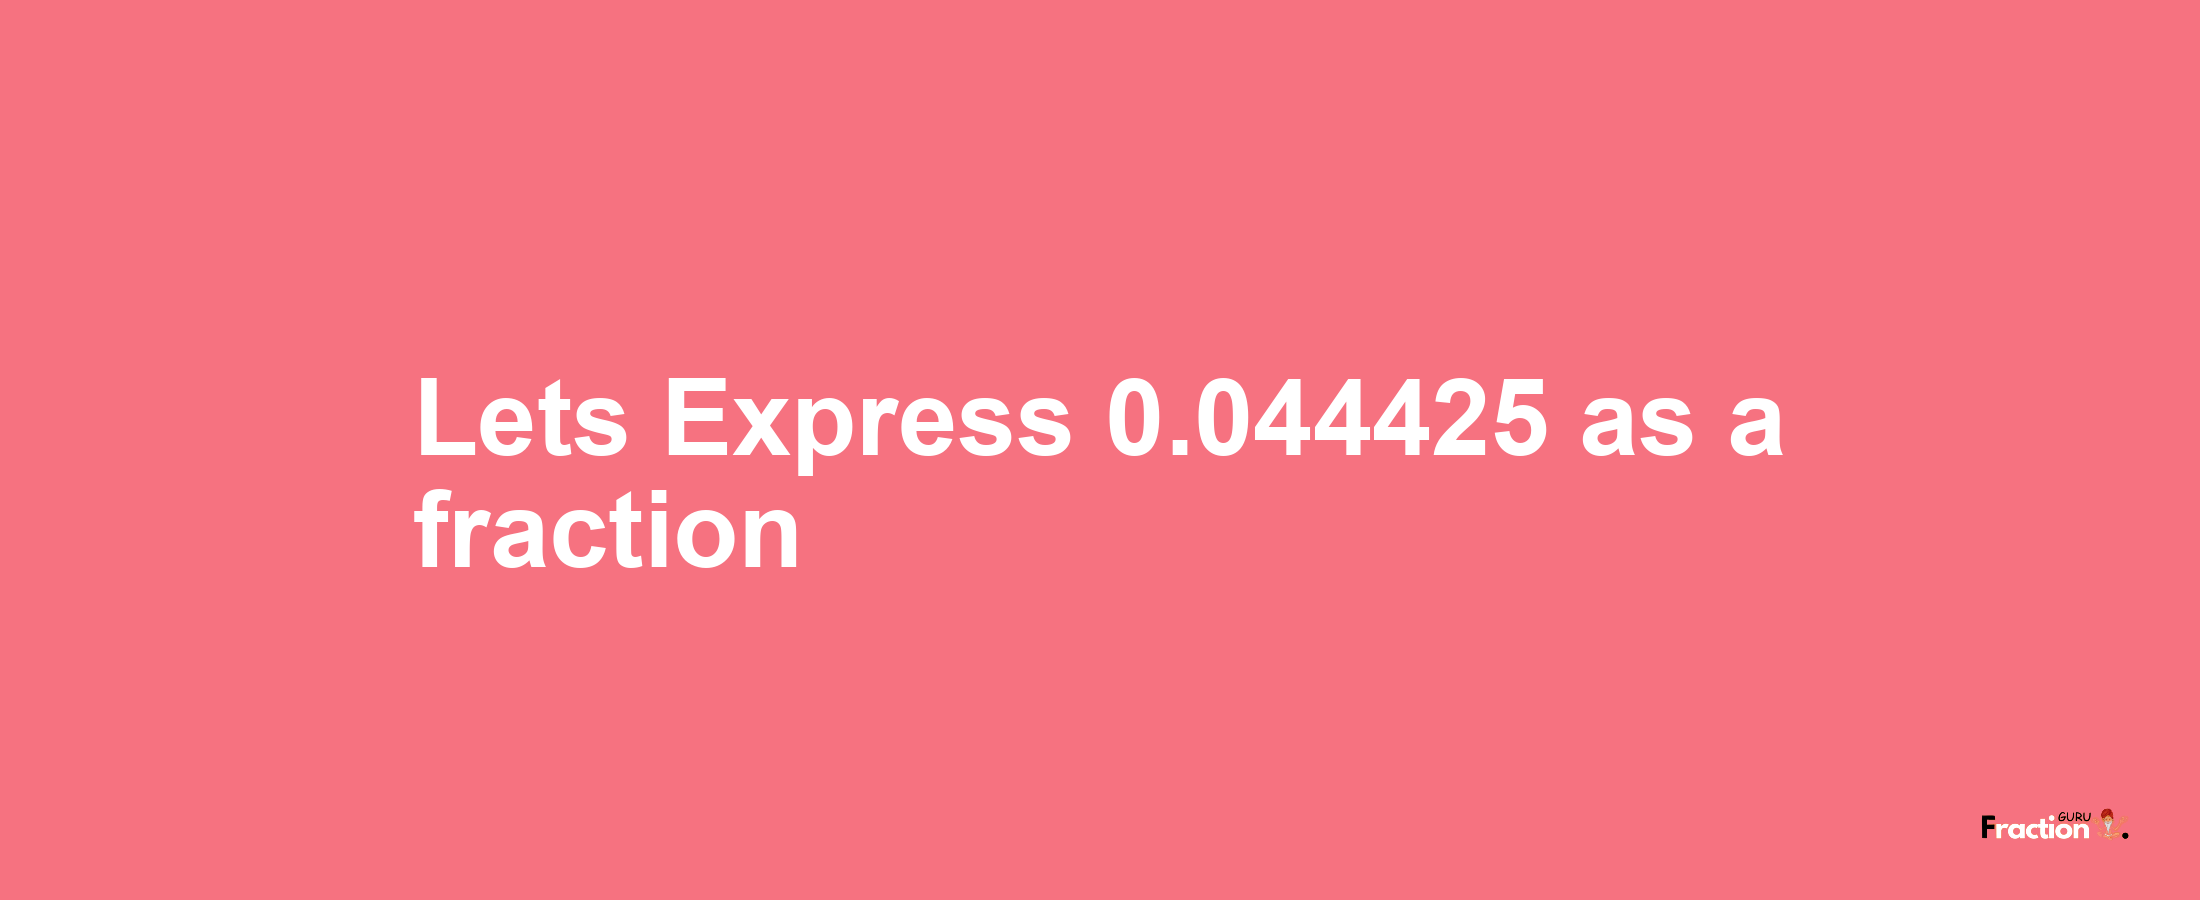 Lets Express 0.044425 as afraction